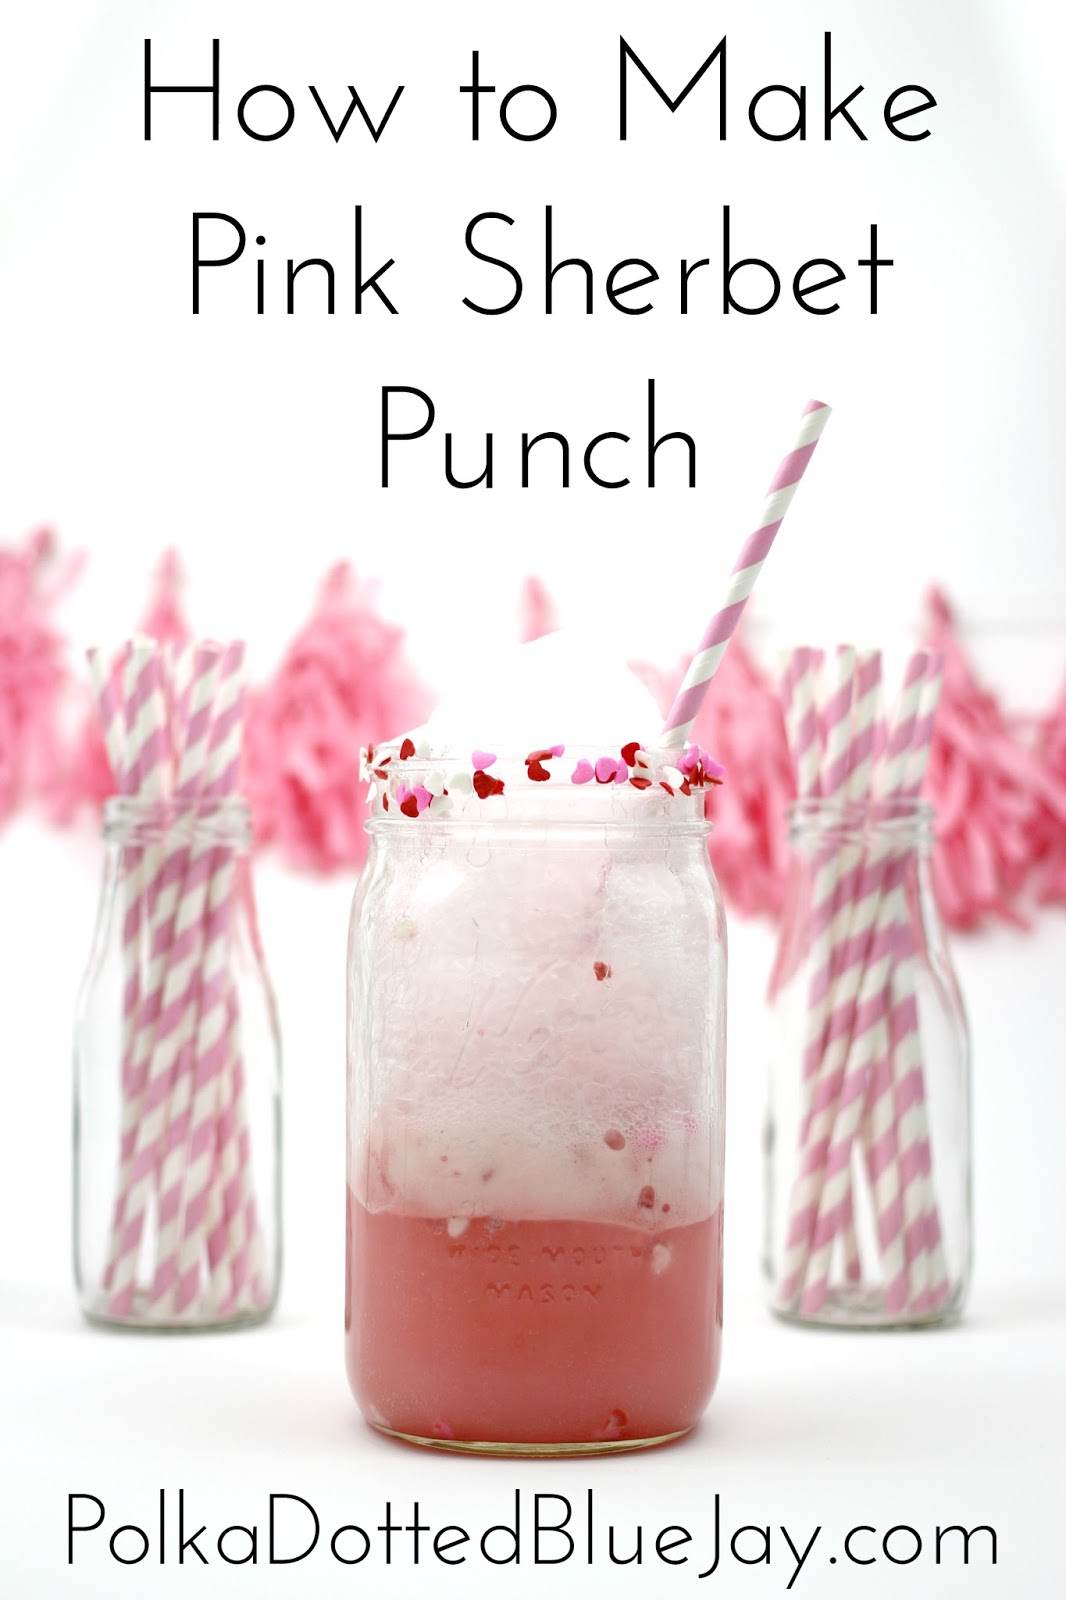 How To Make Pink Sherbet Punch - Polka Dotted Blue Jay